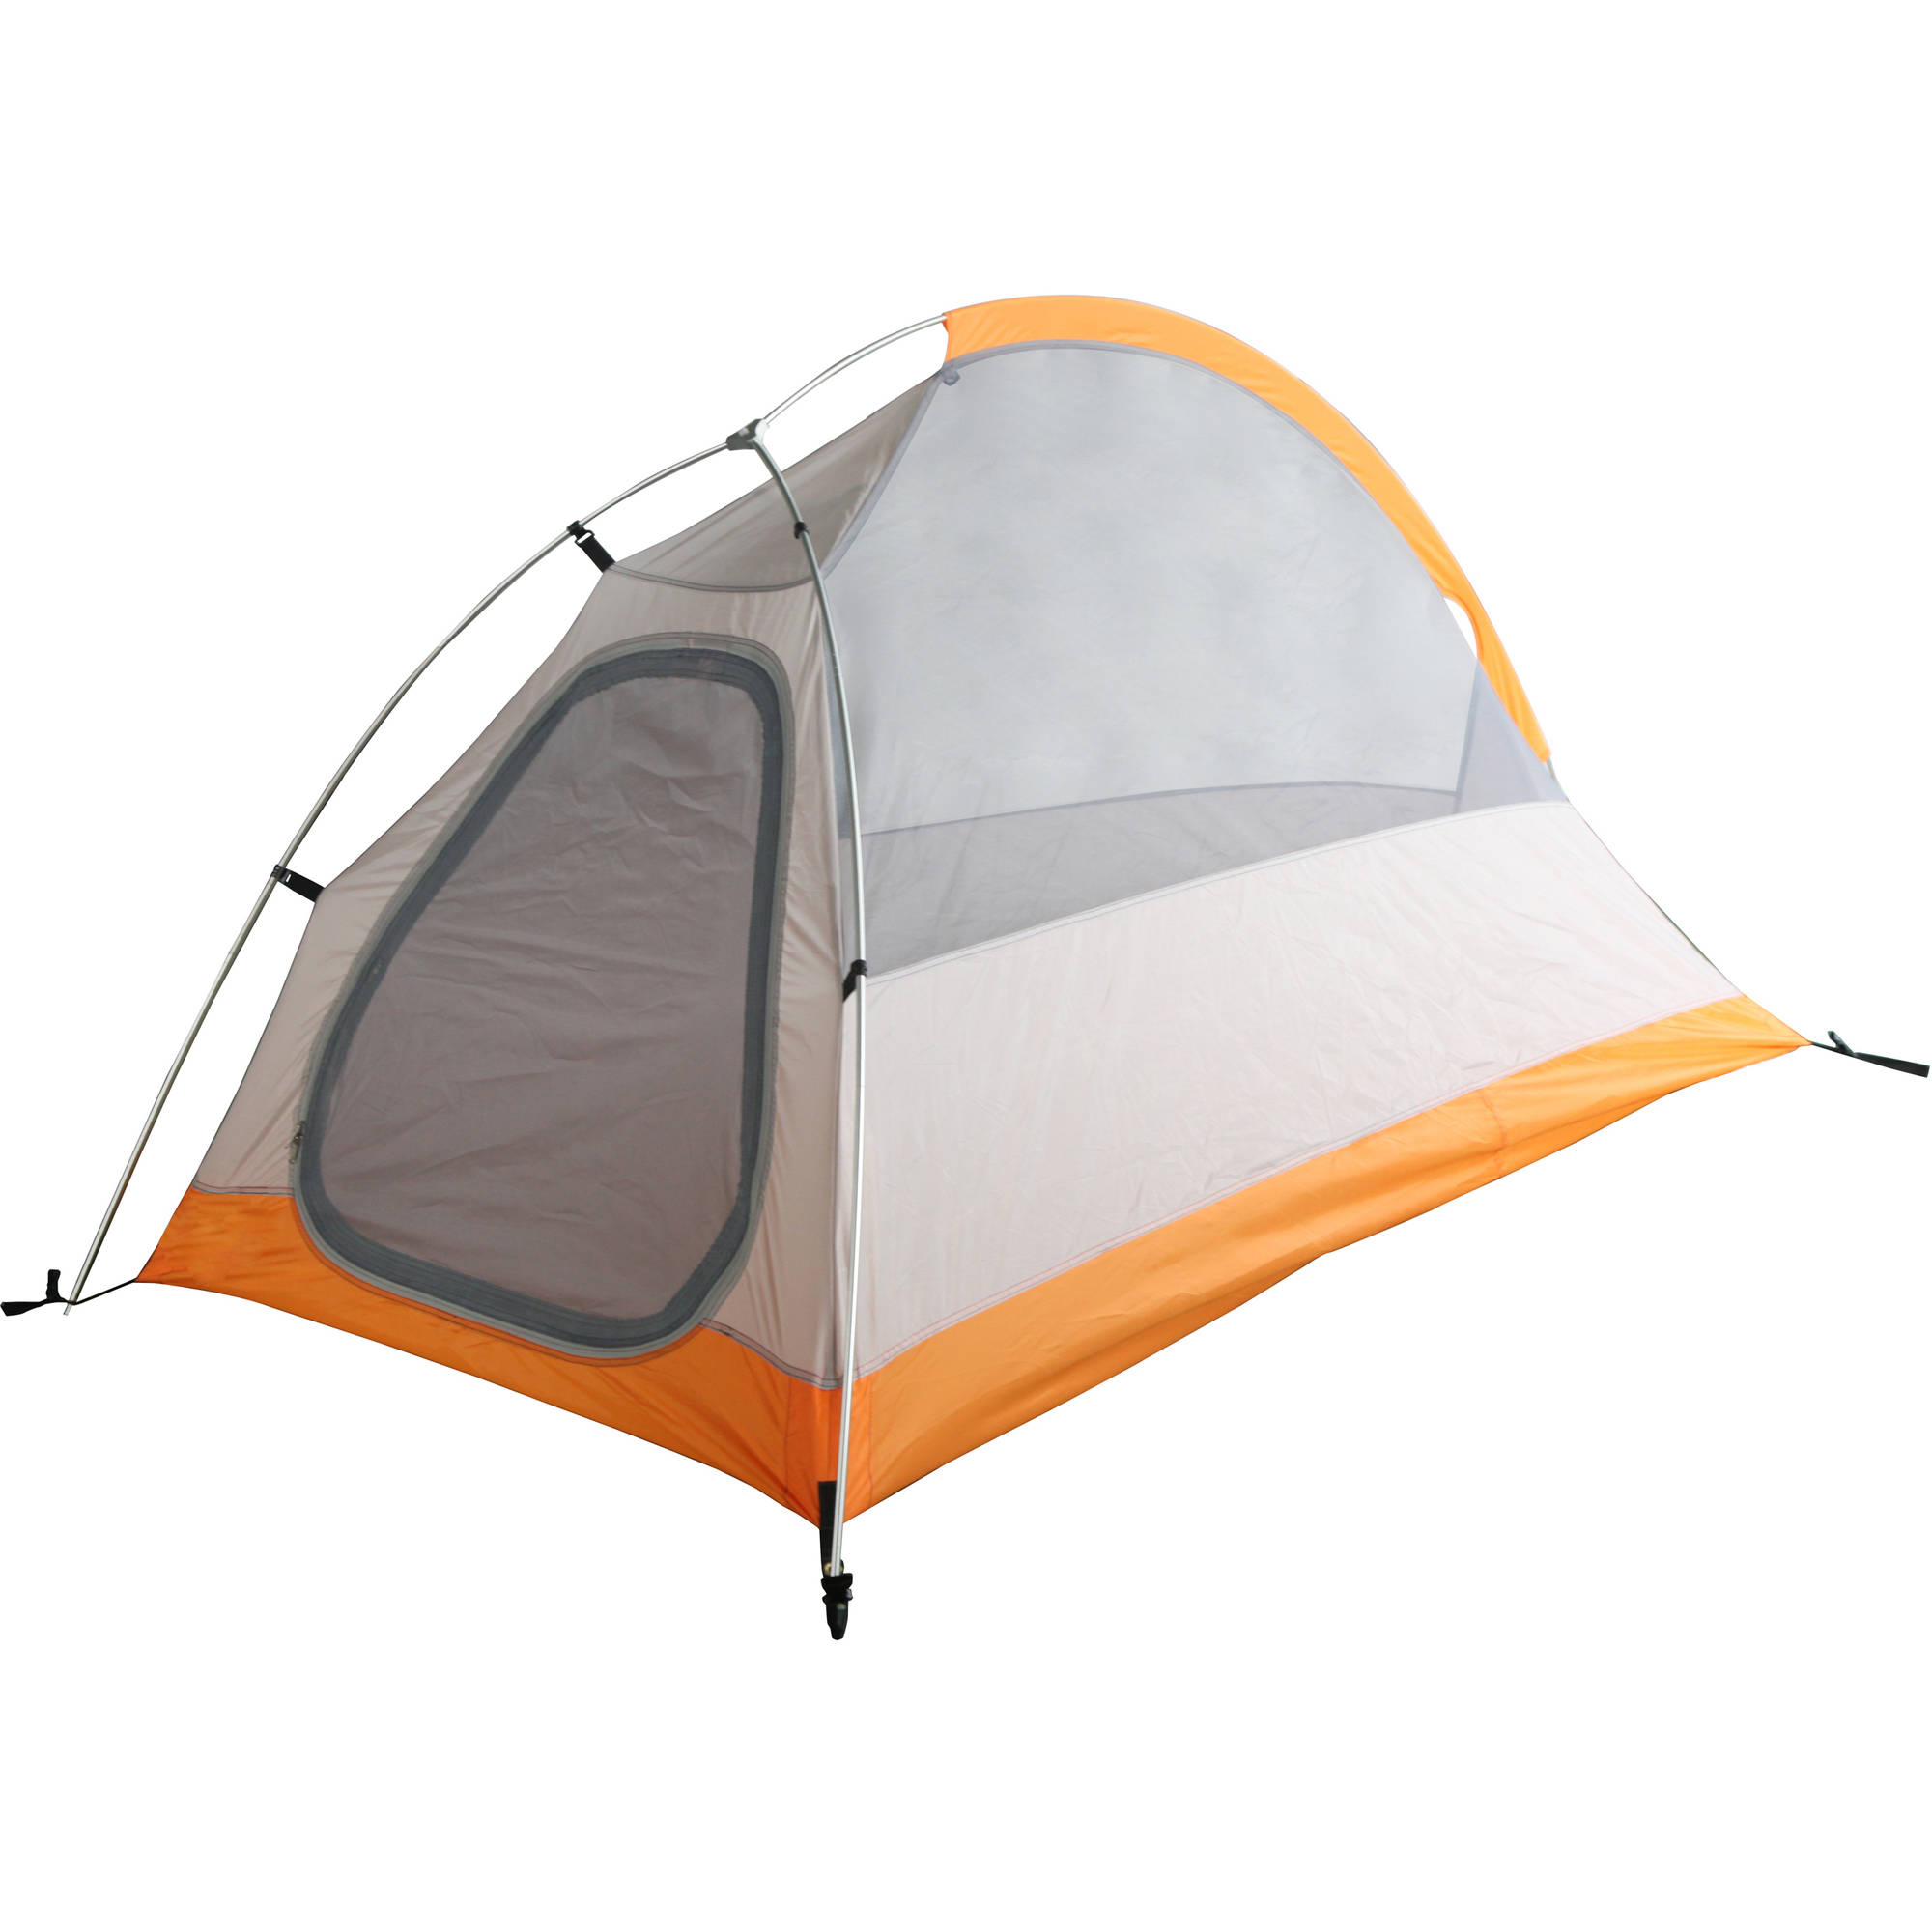 Ozark Trail Ultra Light Outdoor Back Packing 4' x 7' x 6'5" One-Room Tent, Orange - image 2 of 10